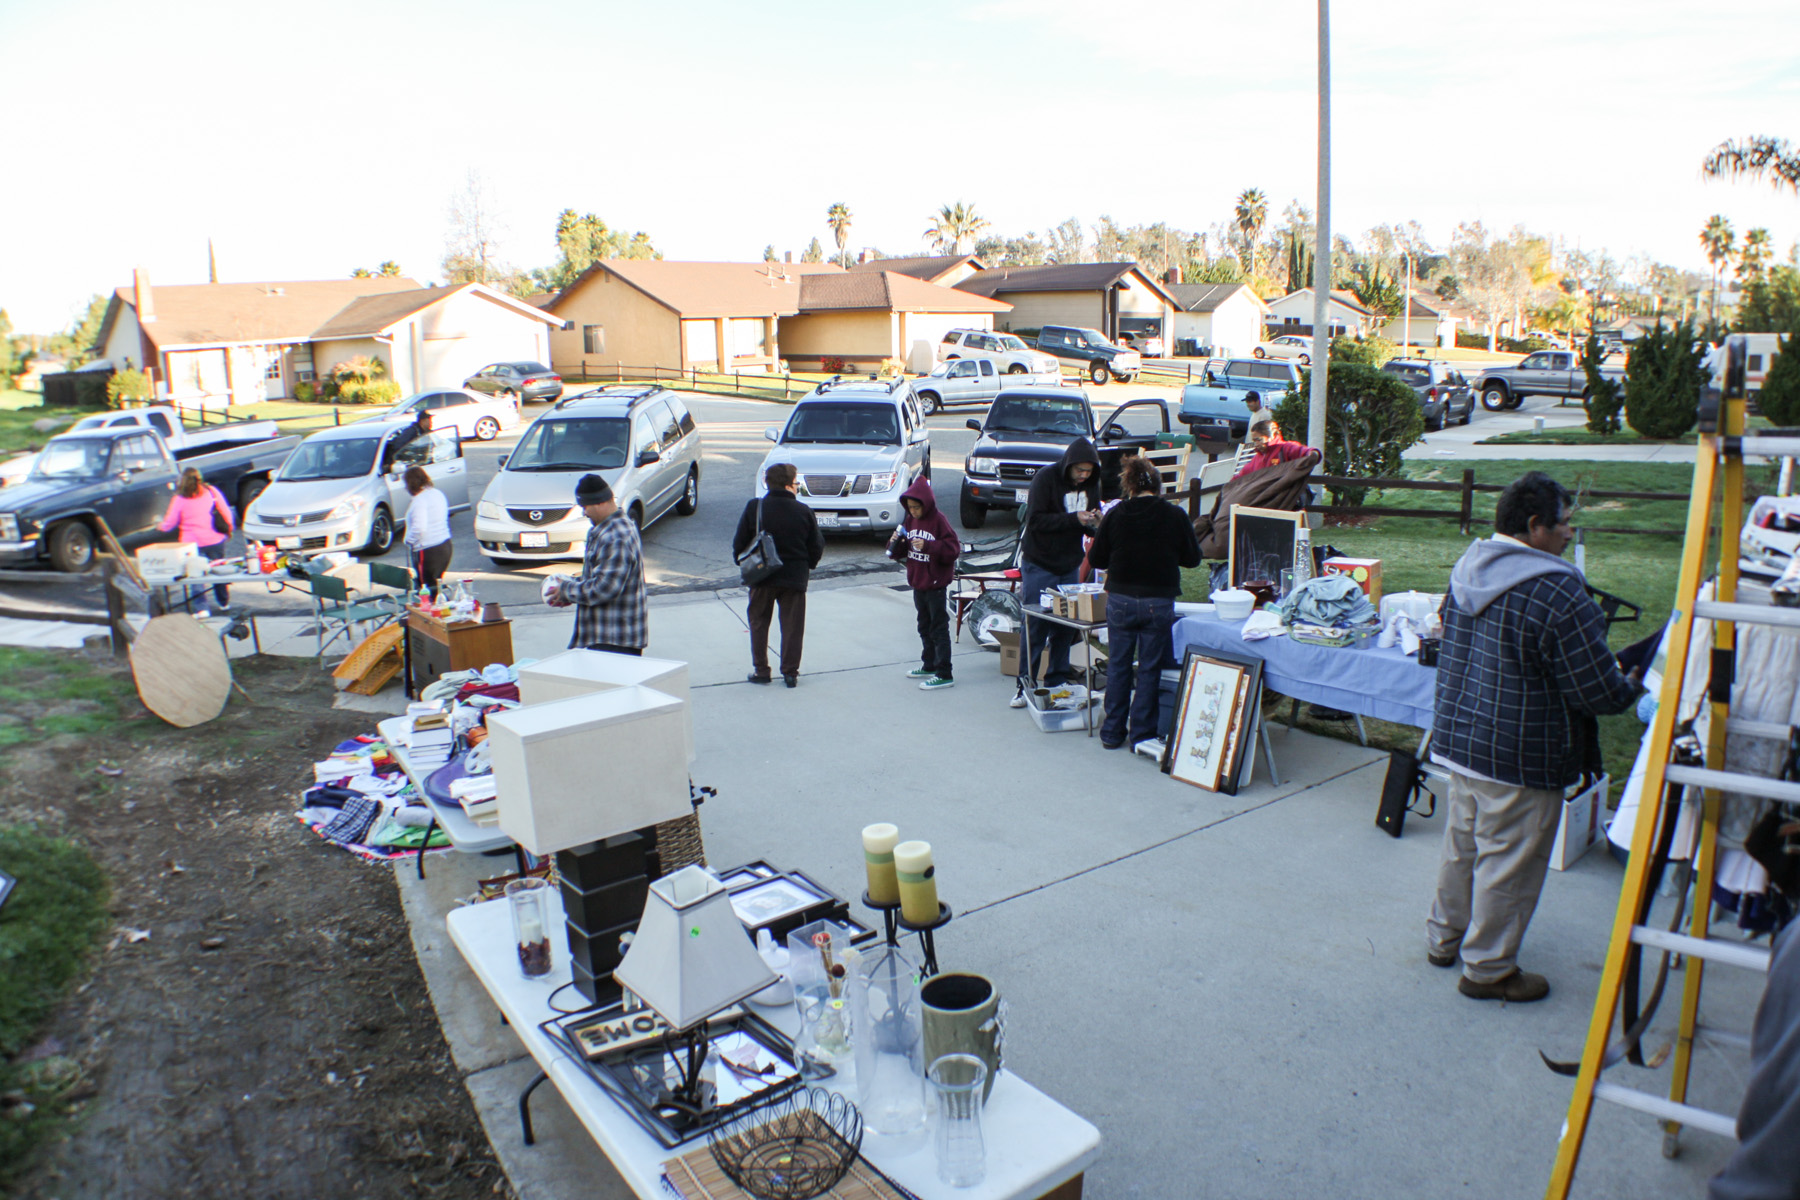 Learn how to Sell Everything at Garage Sales and get the best prices